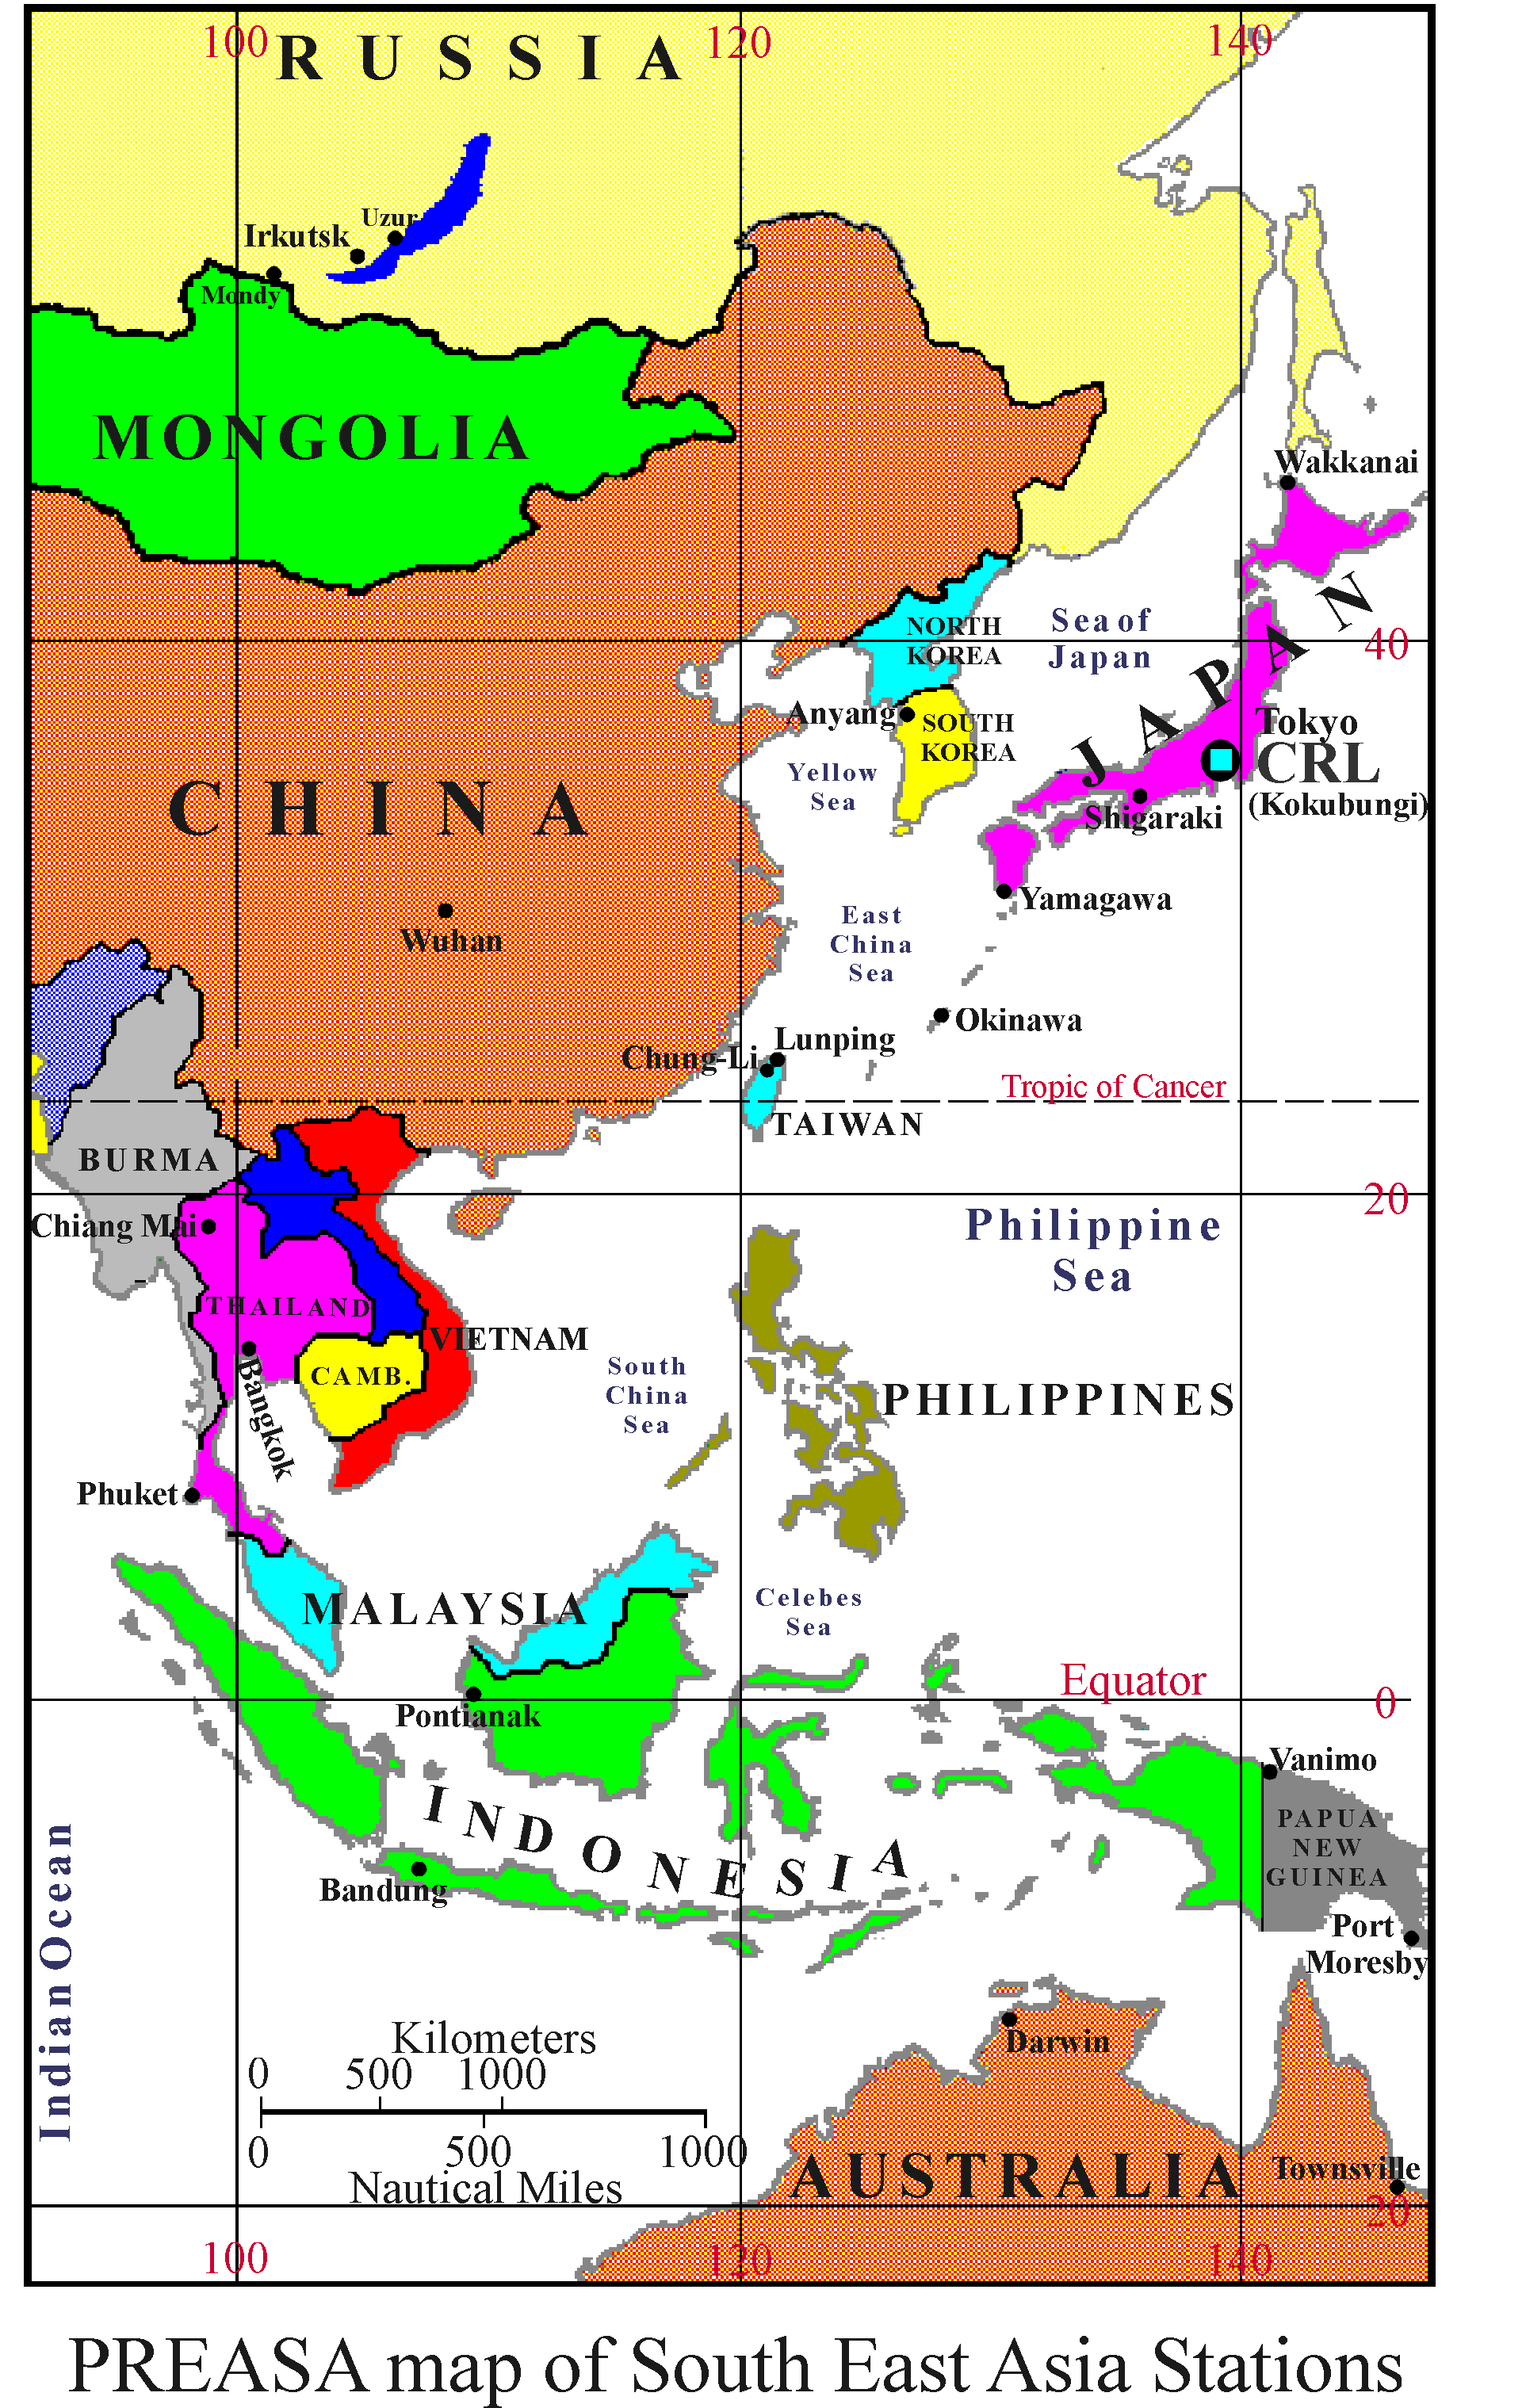 The Lines Drew On The Physical Maps In Southeast Asia 27